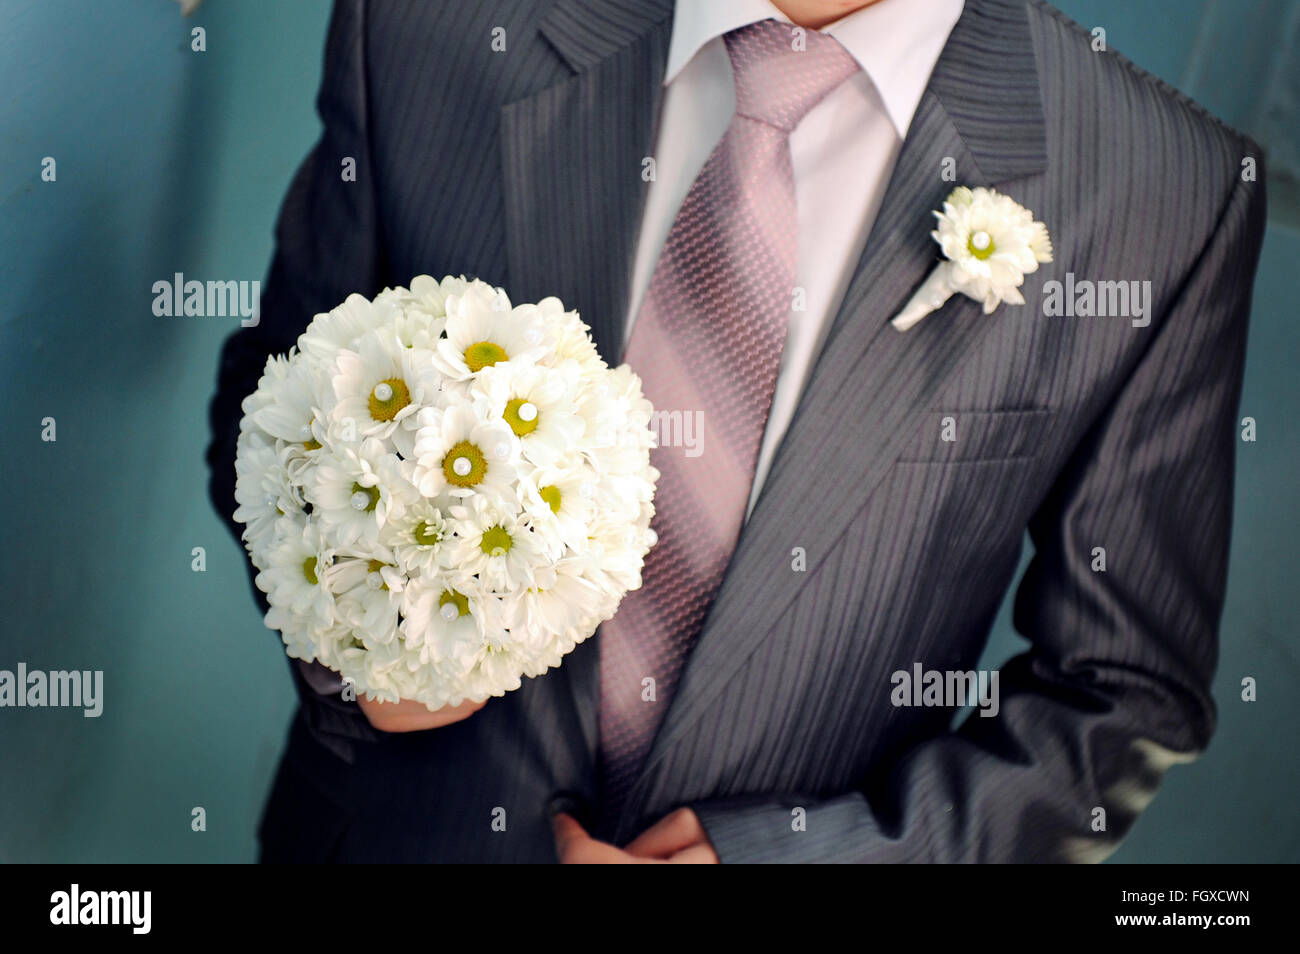 groom hold wedding bouquet in his hand for bride Stock Photo